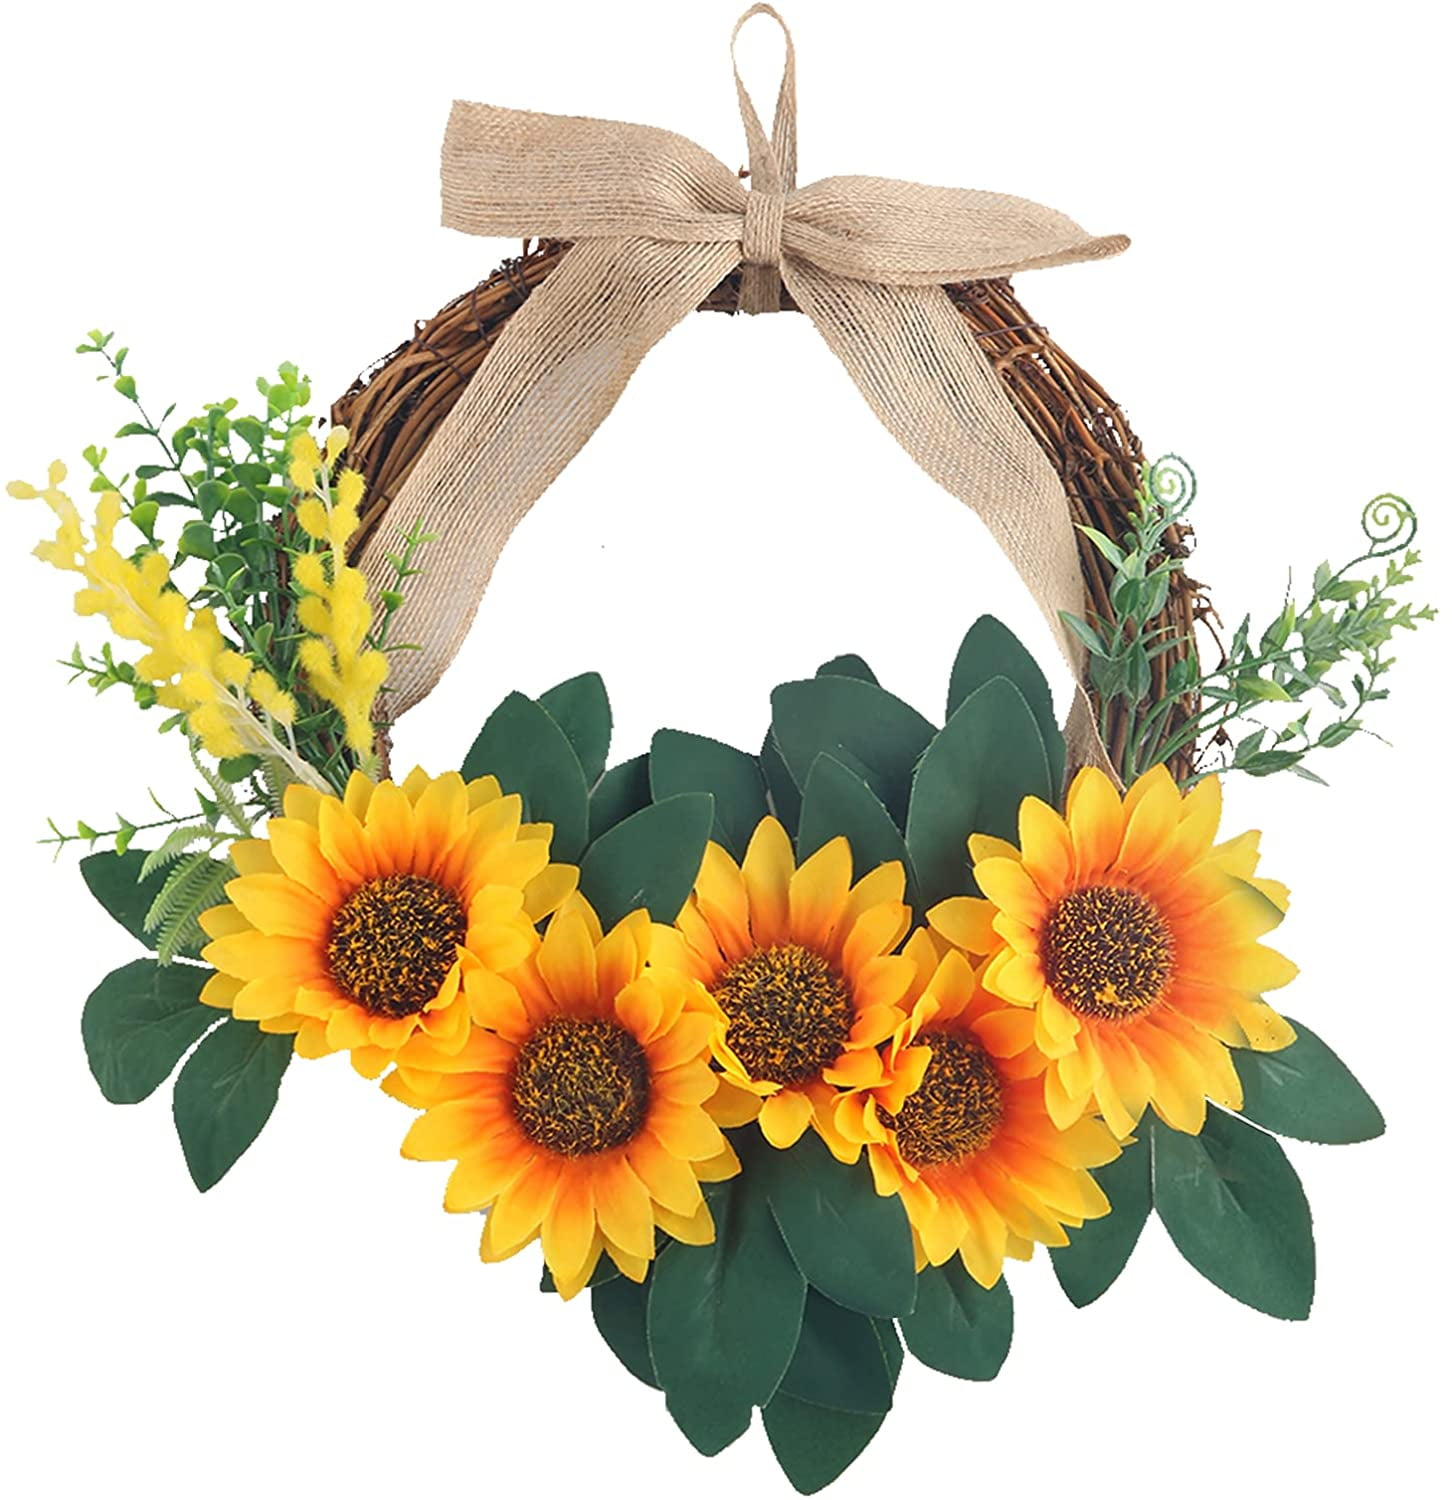 Country bright yellow and black welcome porch decor.Mums and flower farmhouse kitchen home decor. Everyday daisy front door wreath